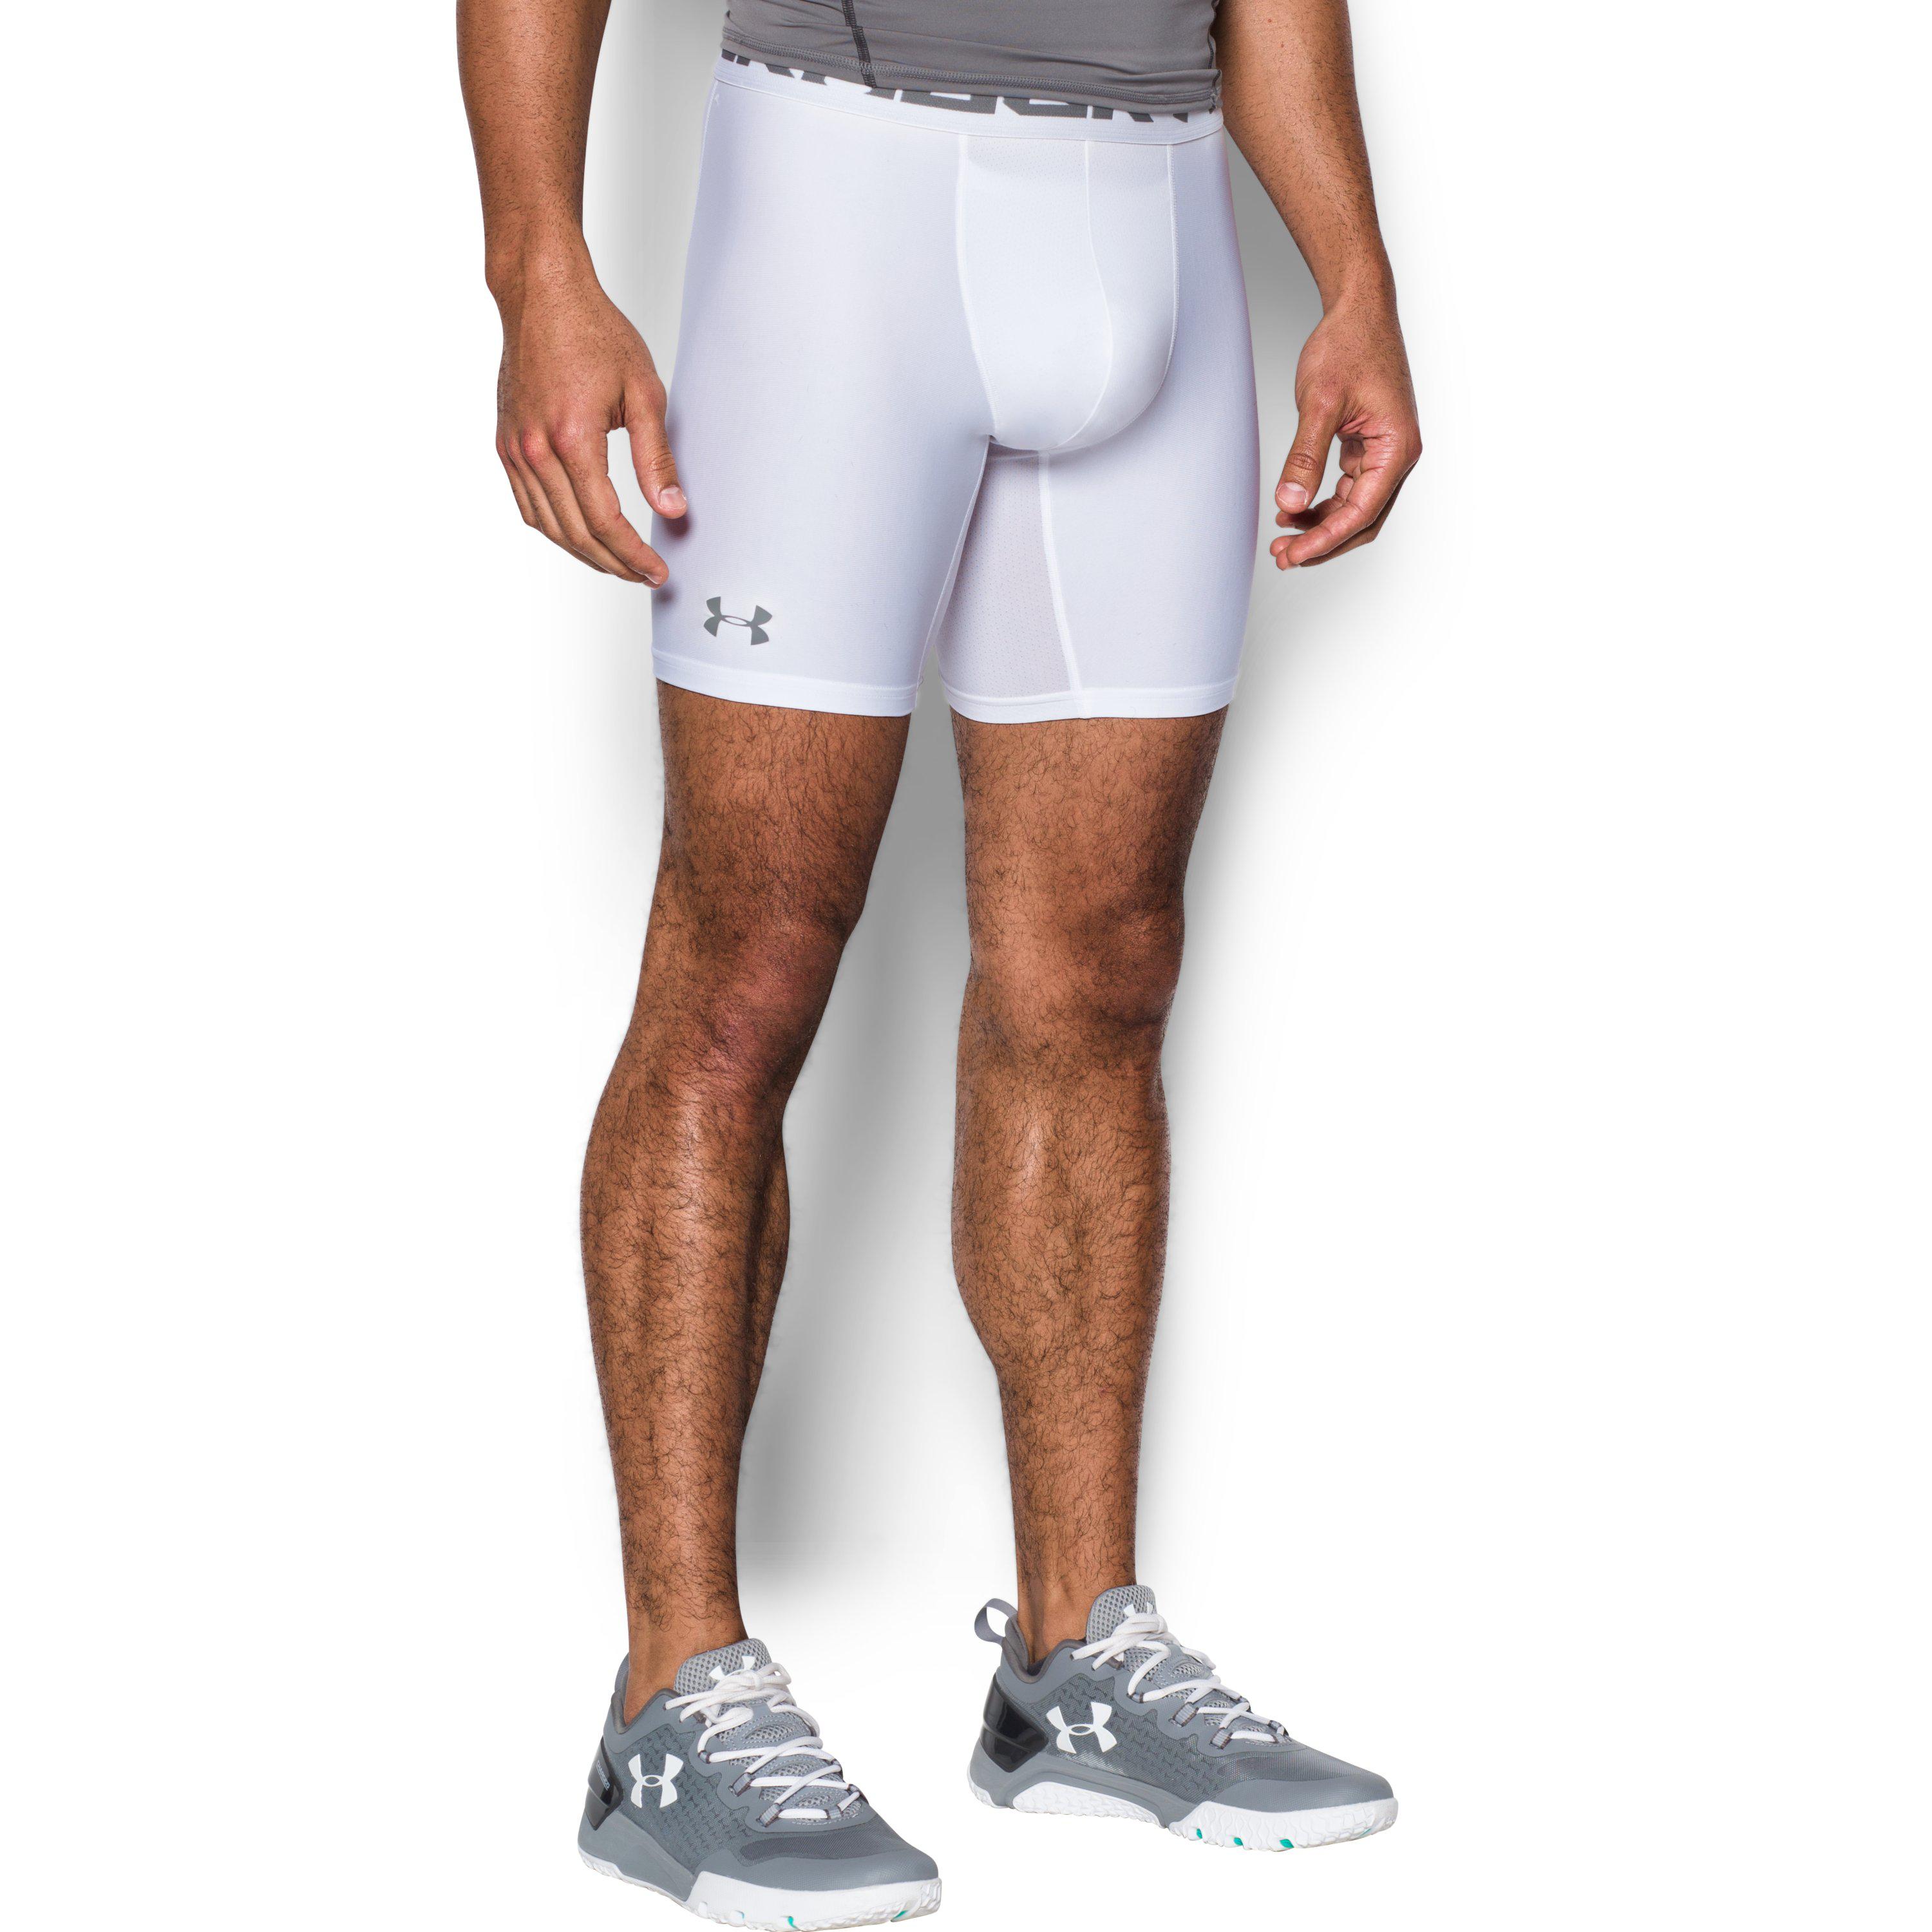 Under Armour Men's Heatgear® Armour Compression Shorts W/ Cup in White/  (White) for Men - Lyst